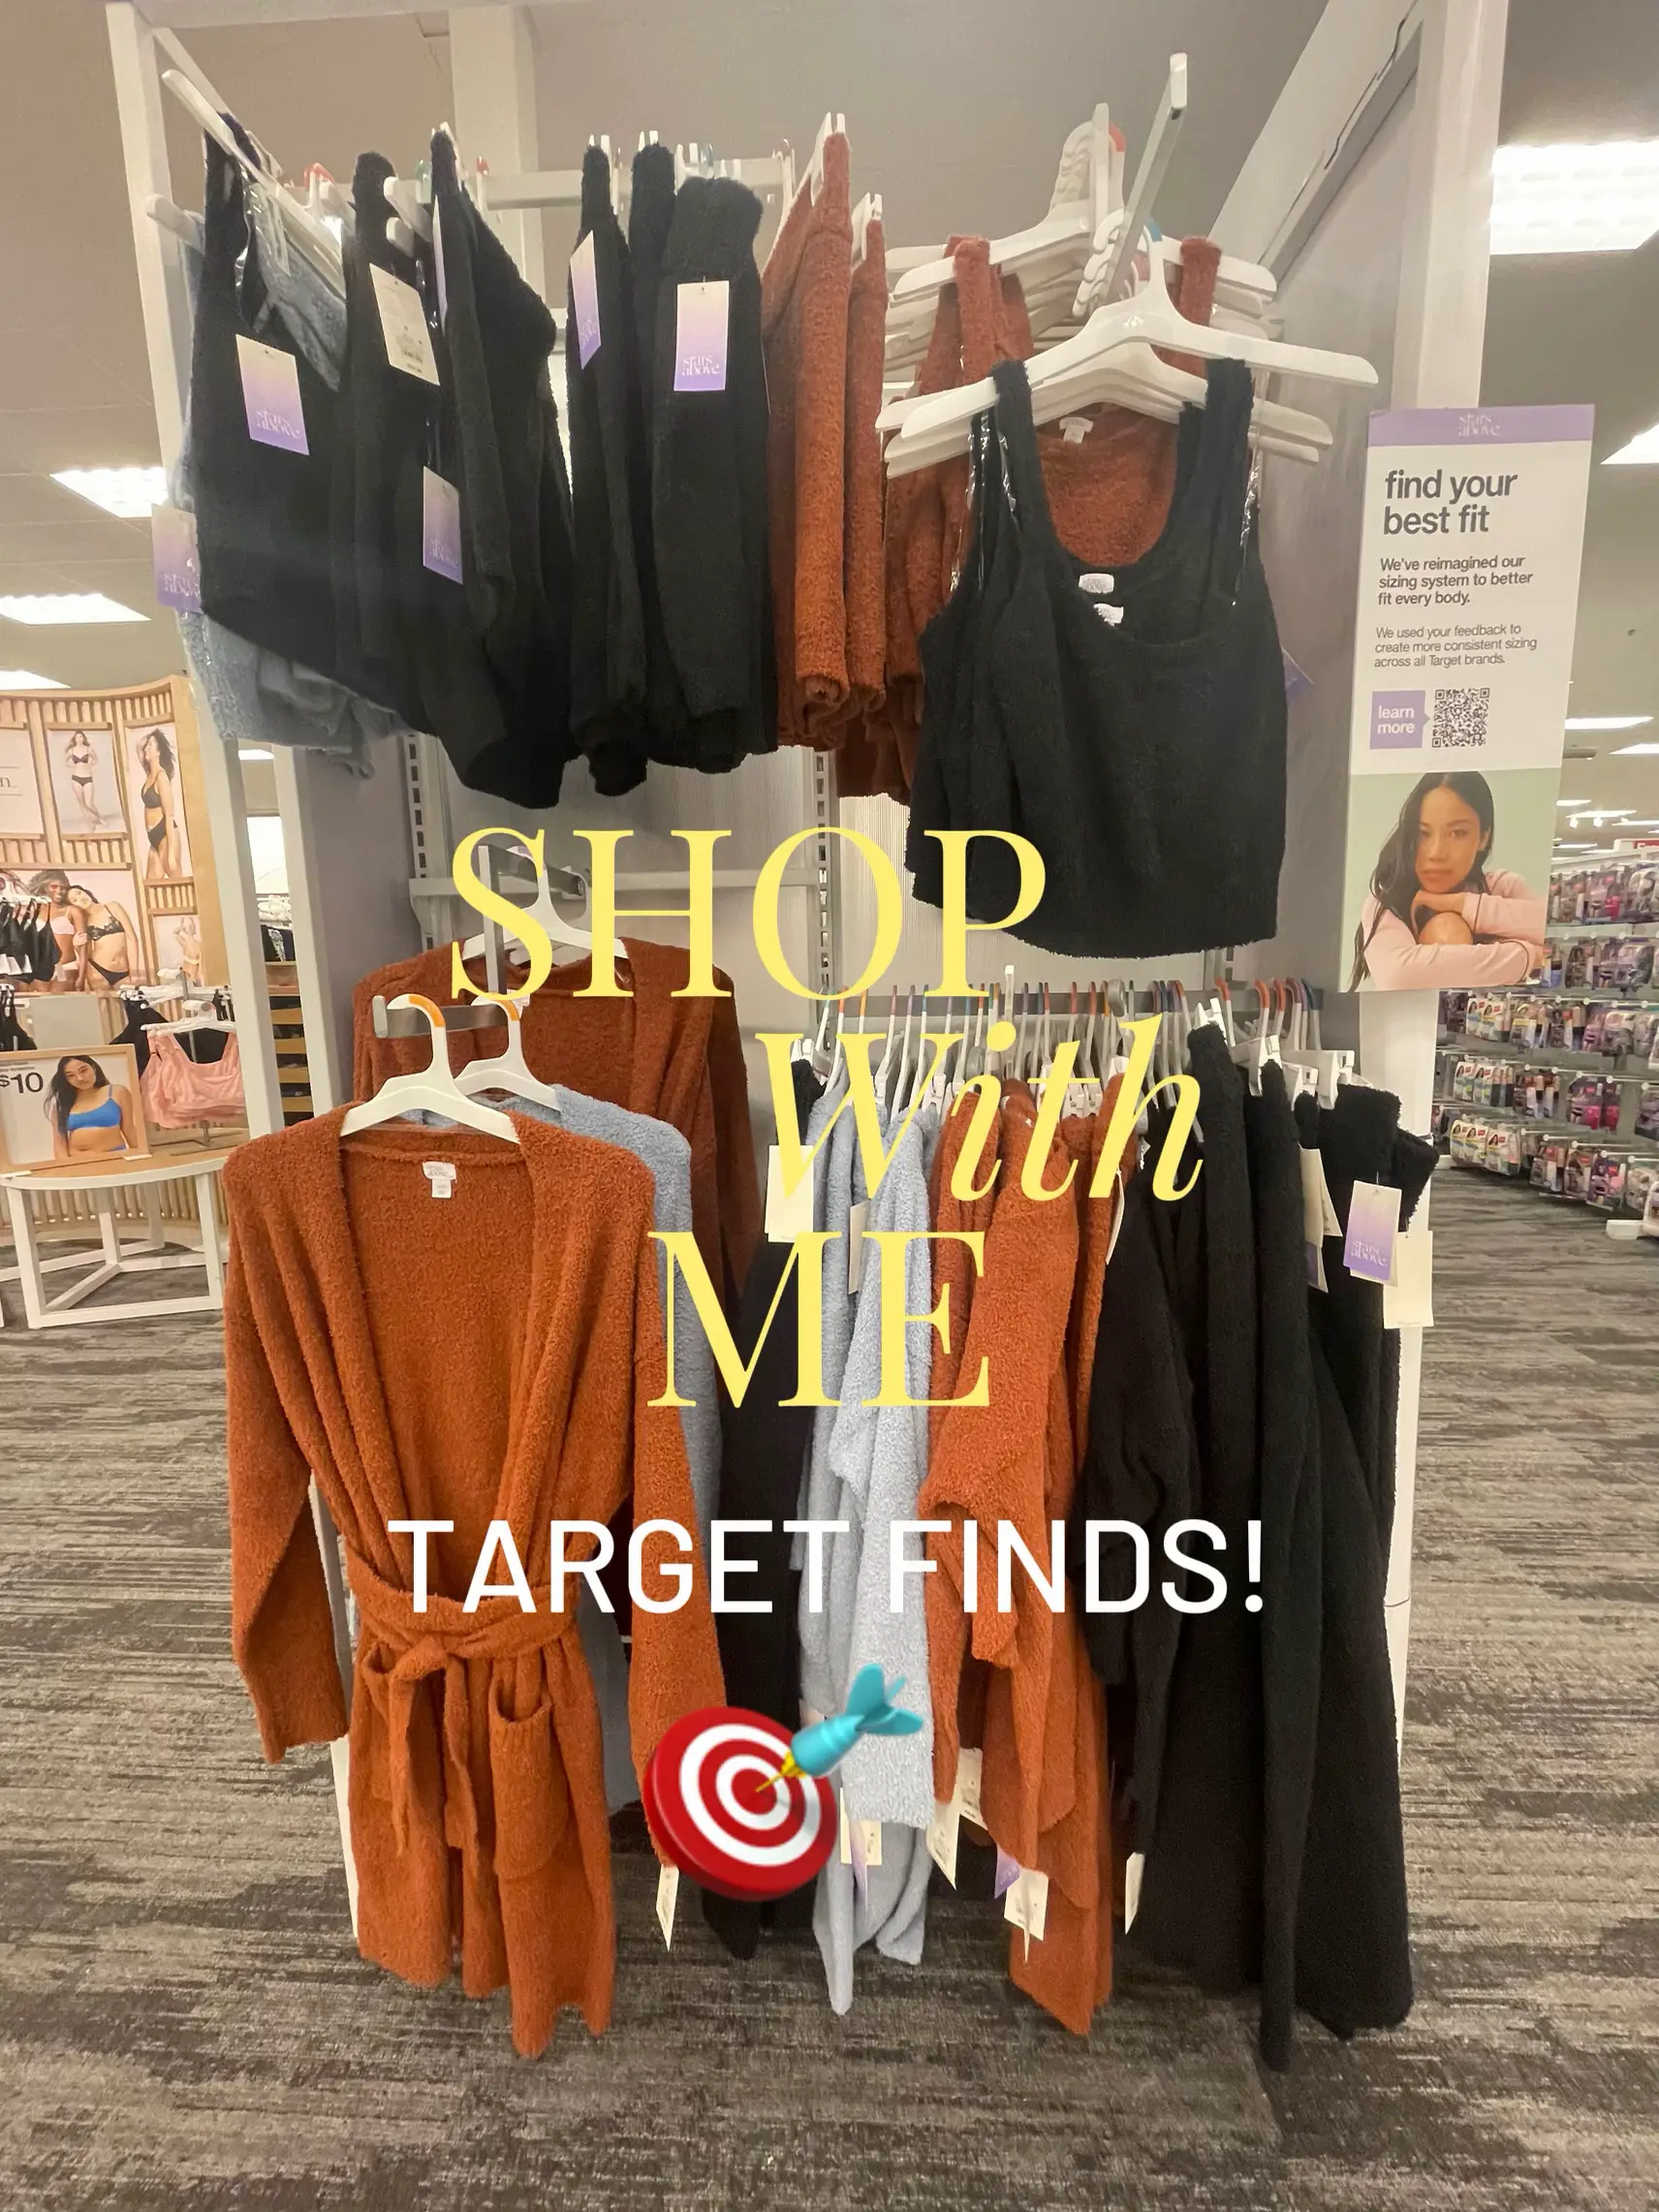 running errands, target shop with me + haul, skims haul, + more! 